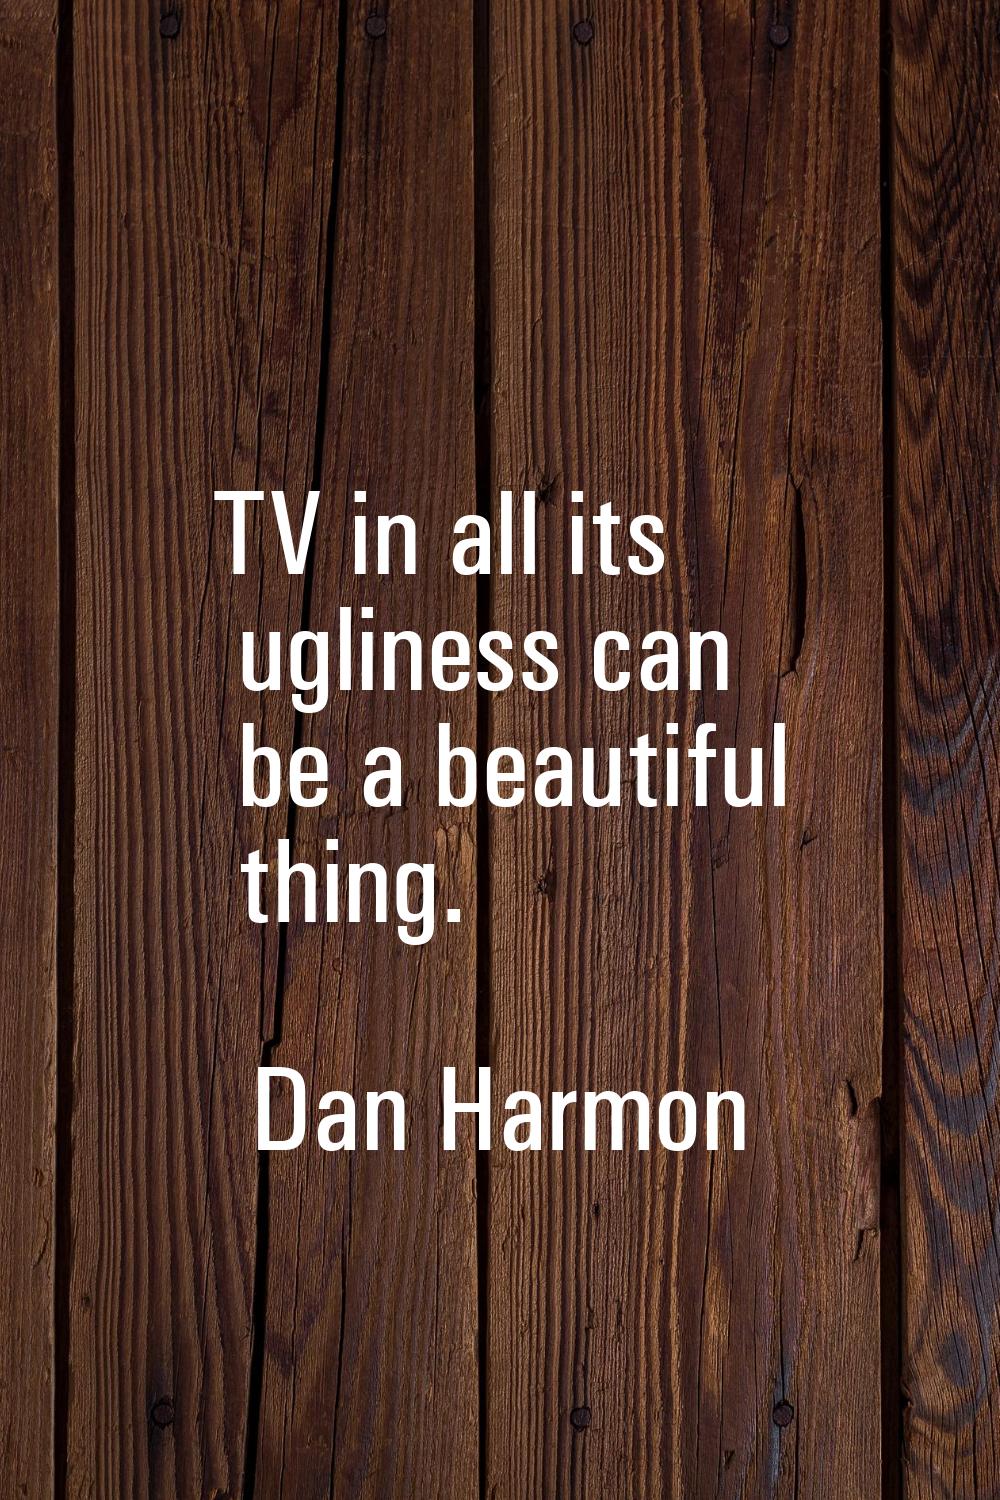 TV in all its ugliness can be a beautiful thing.